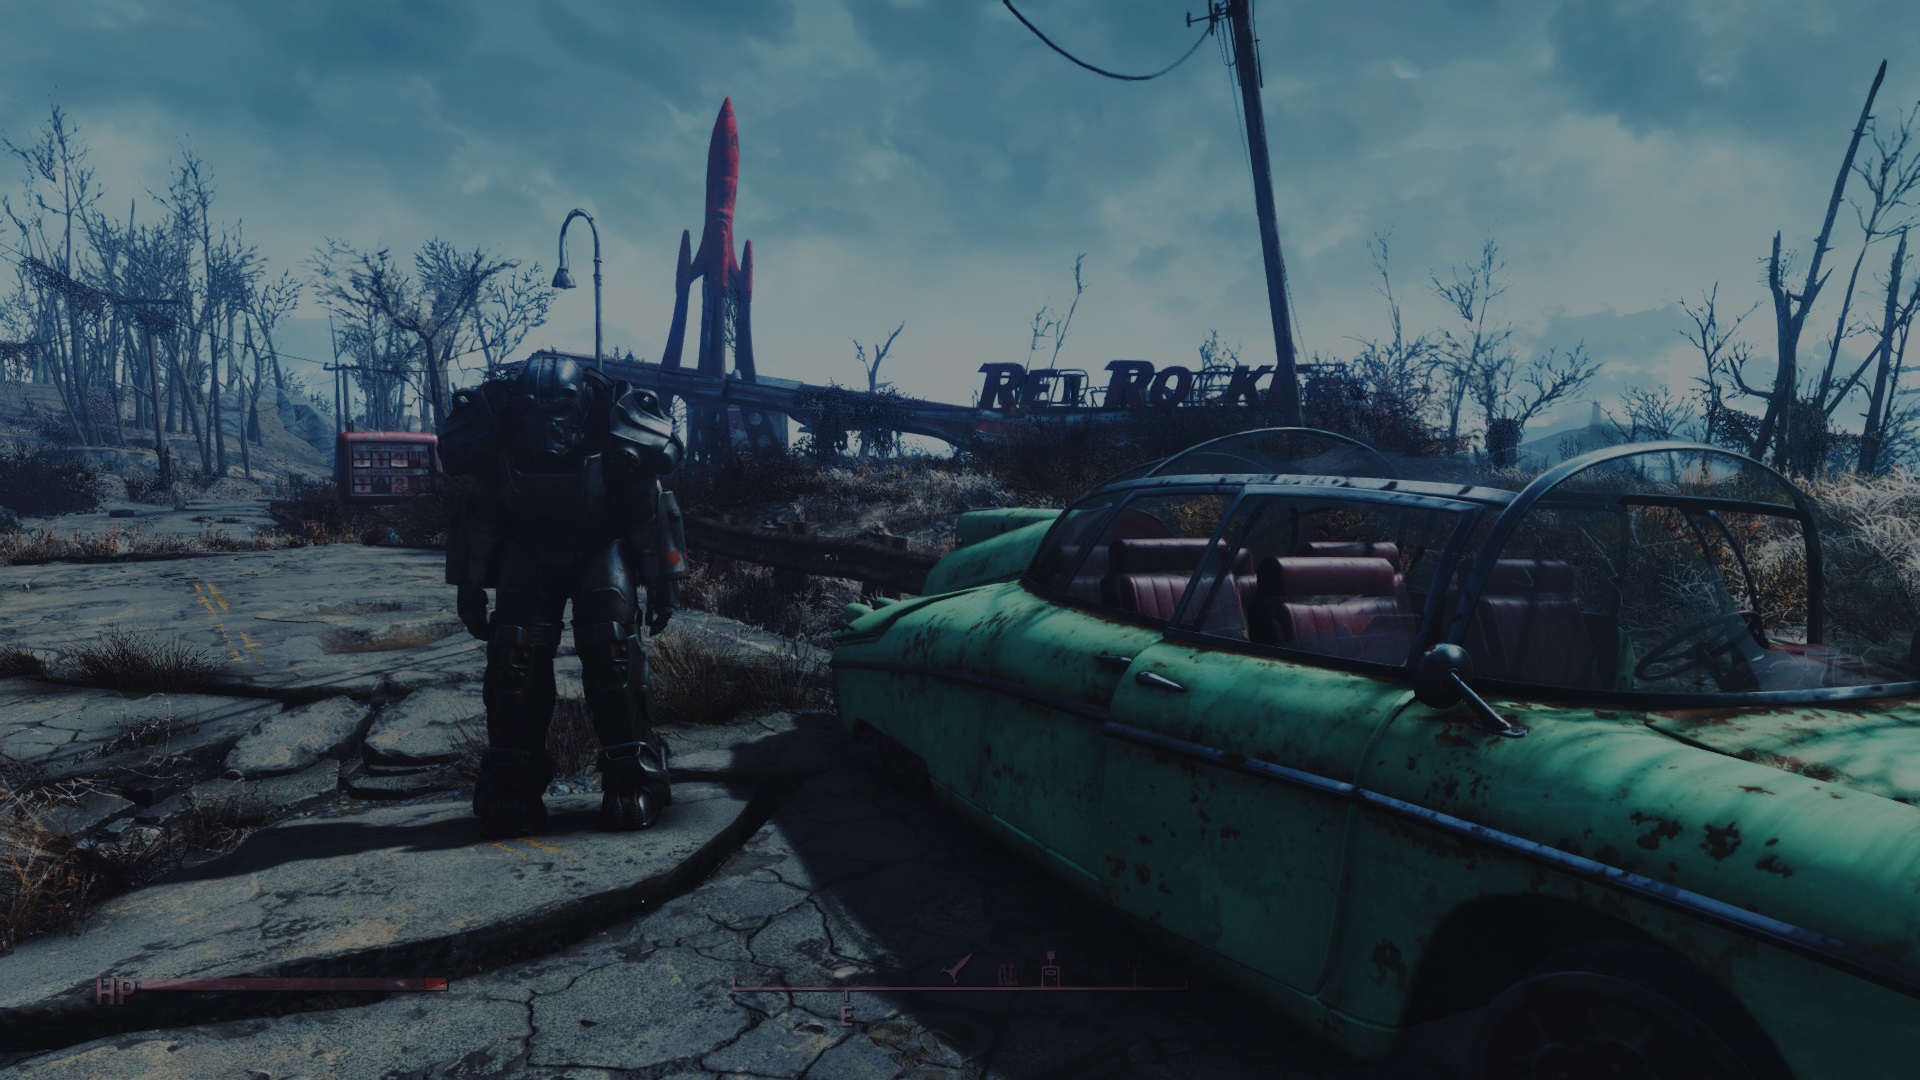 Lowered weapons для fallout 4 фото 94